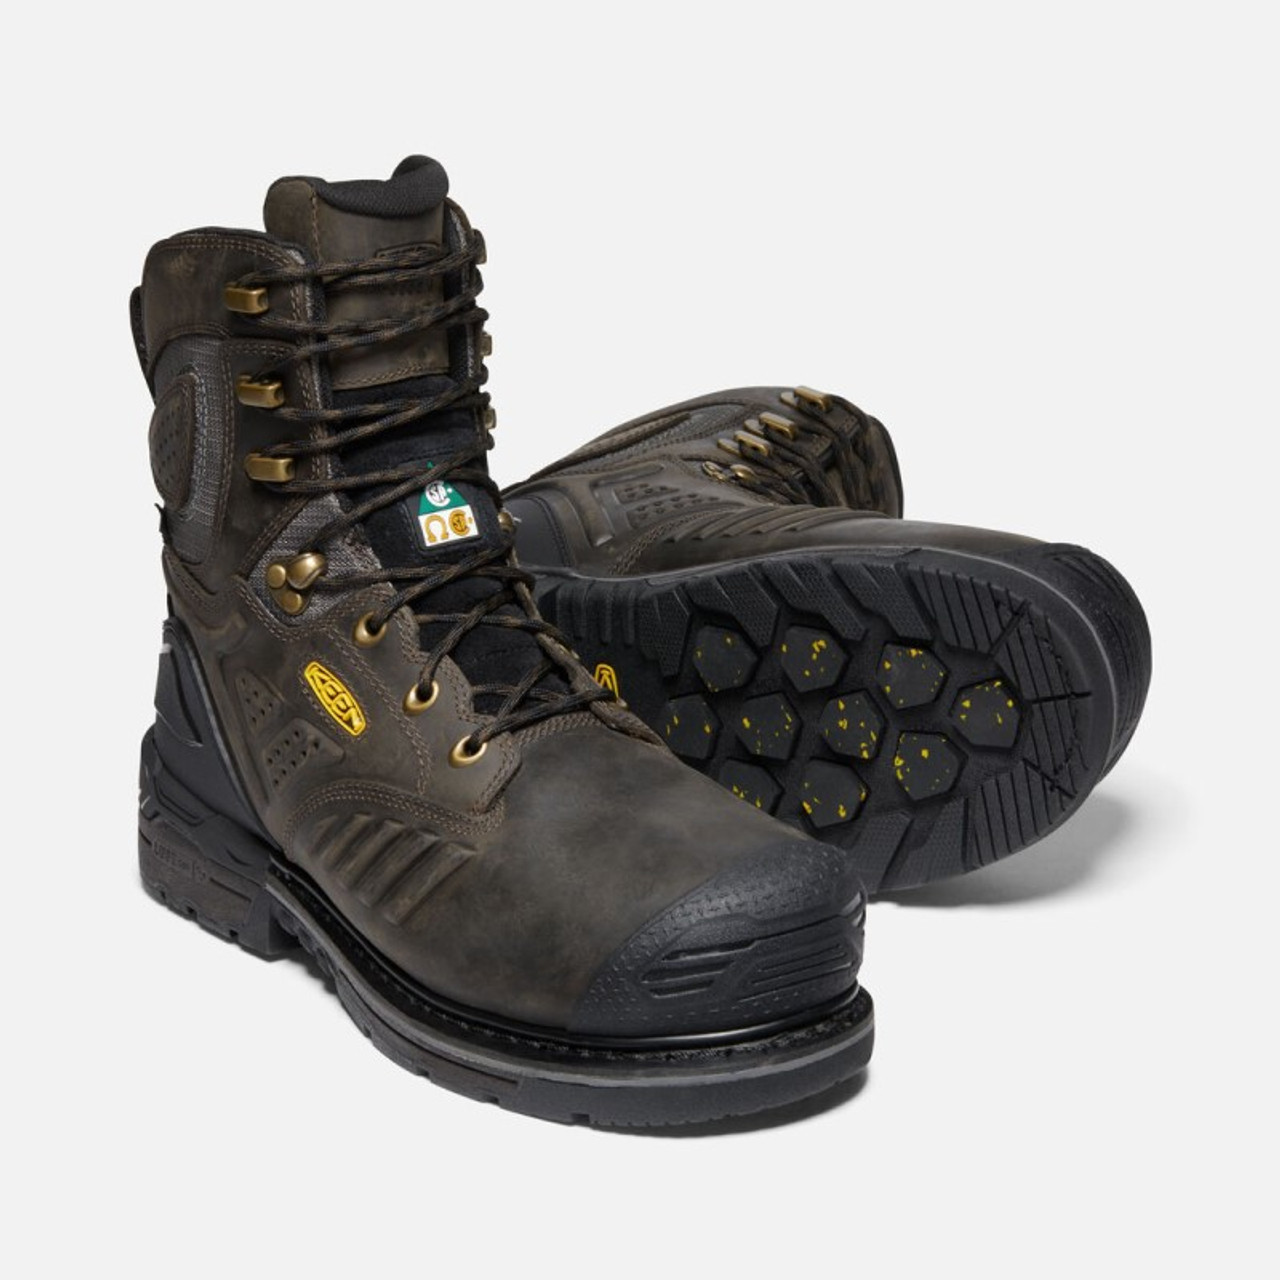 insulated and waterproof work boots